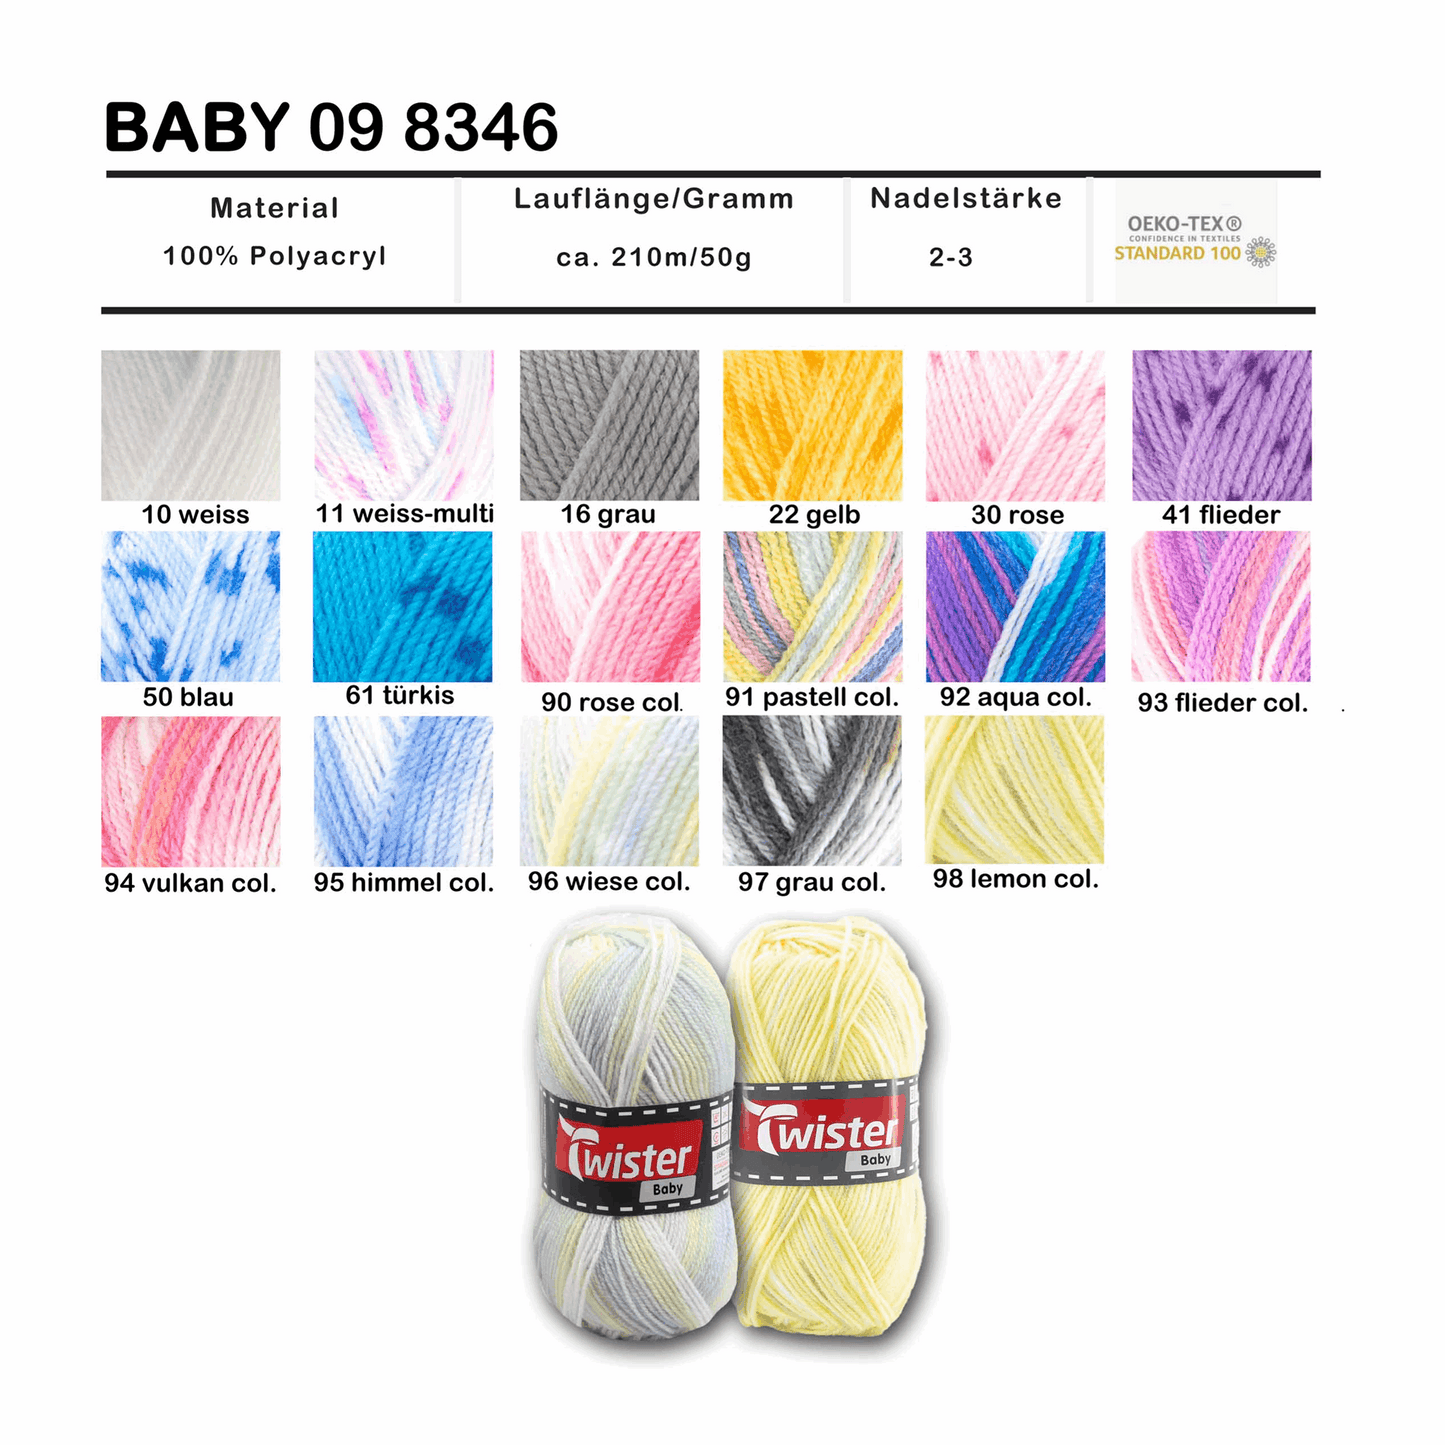 Twister Baby, 50g, 98346, color rose color 90